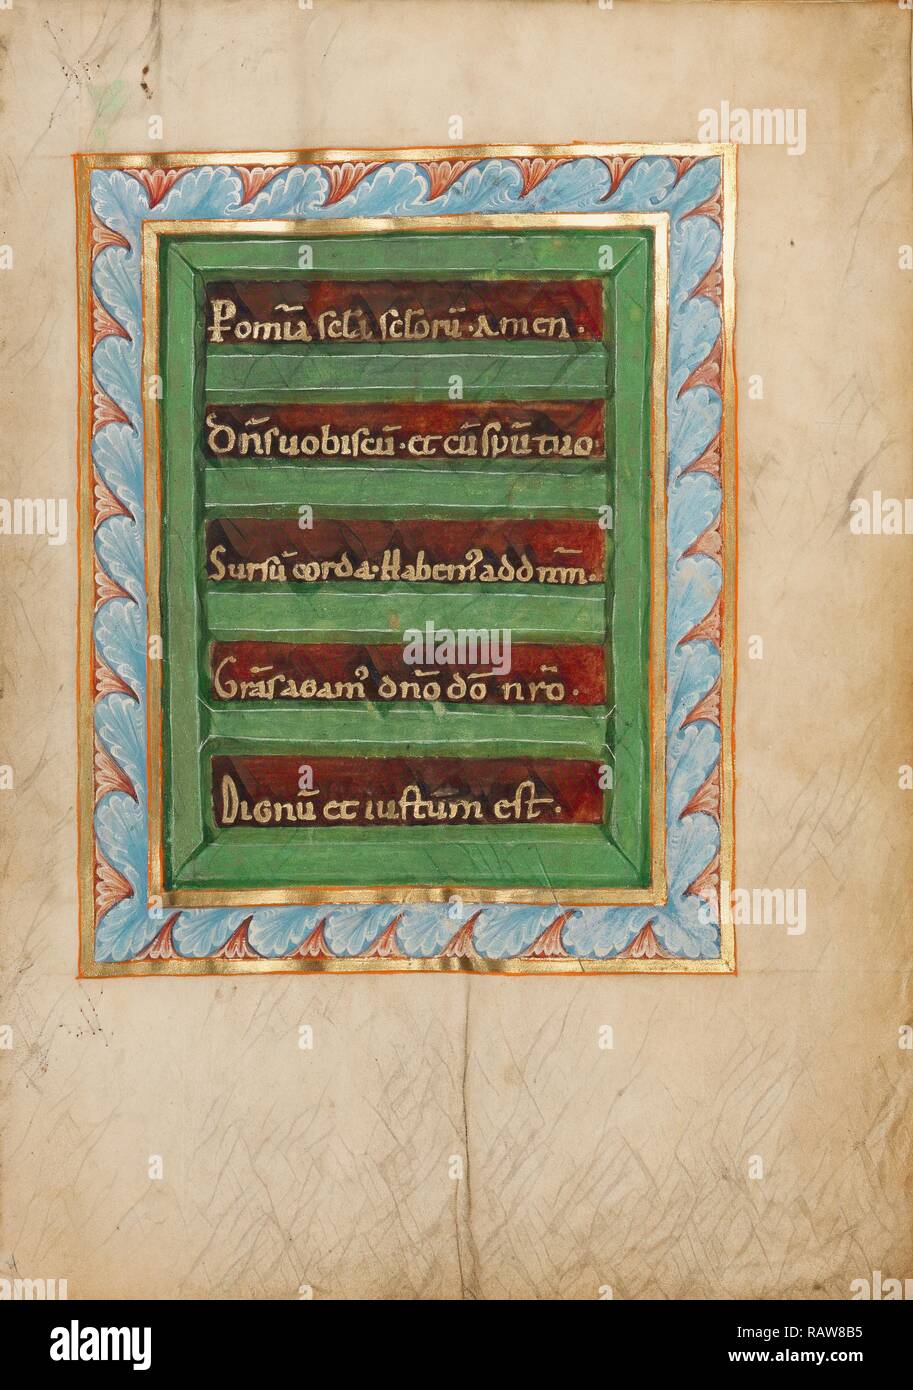 Decorated Incipit Page, Unknown, about 1025 - 1050, Tempera colors and gold on parchment. Reimagined Stock Photo